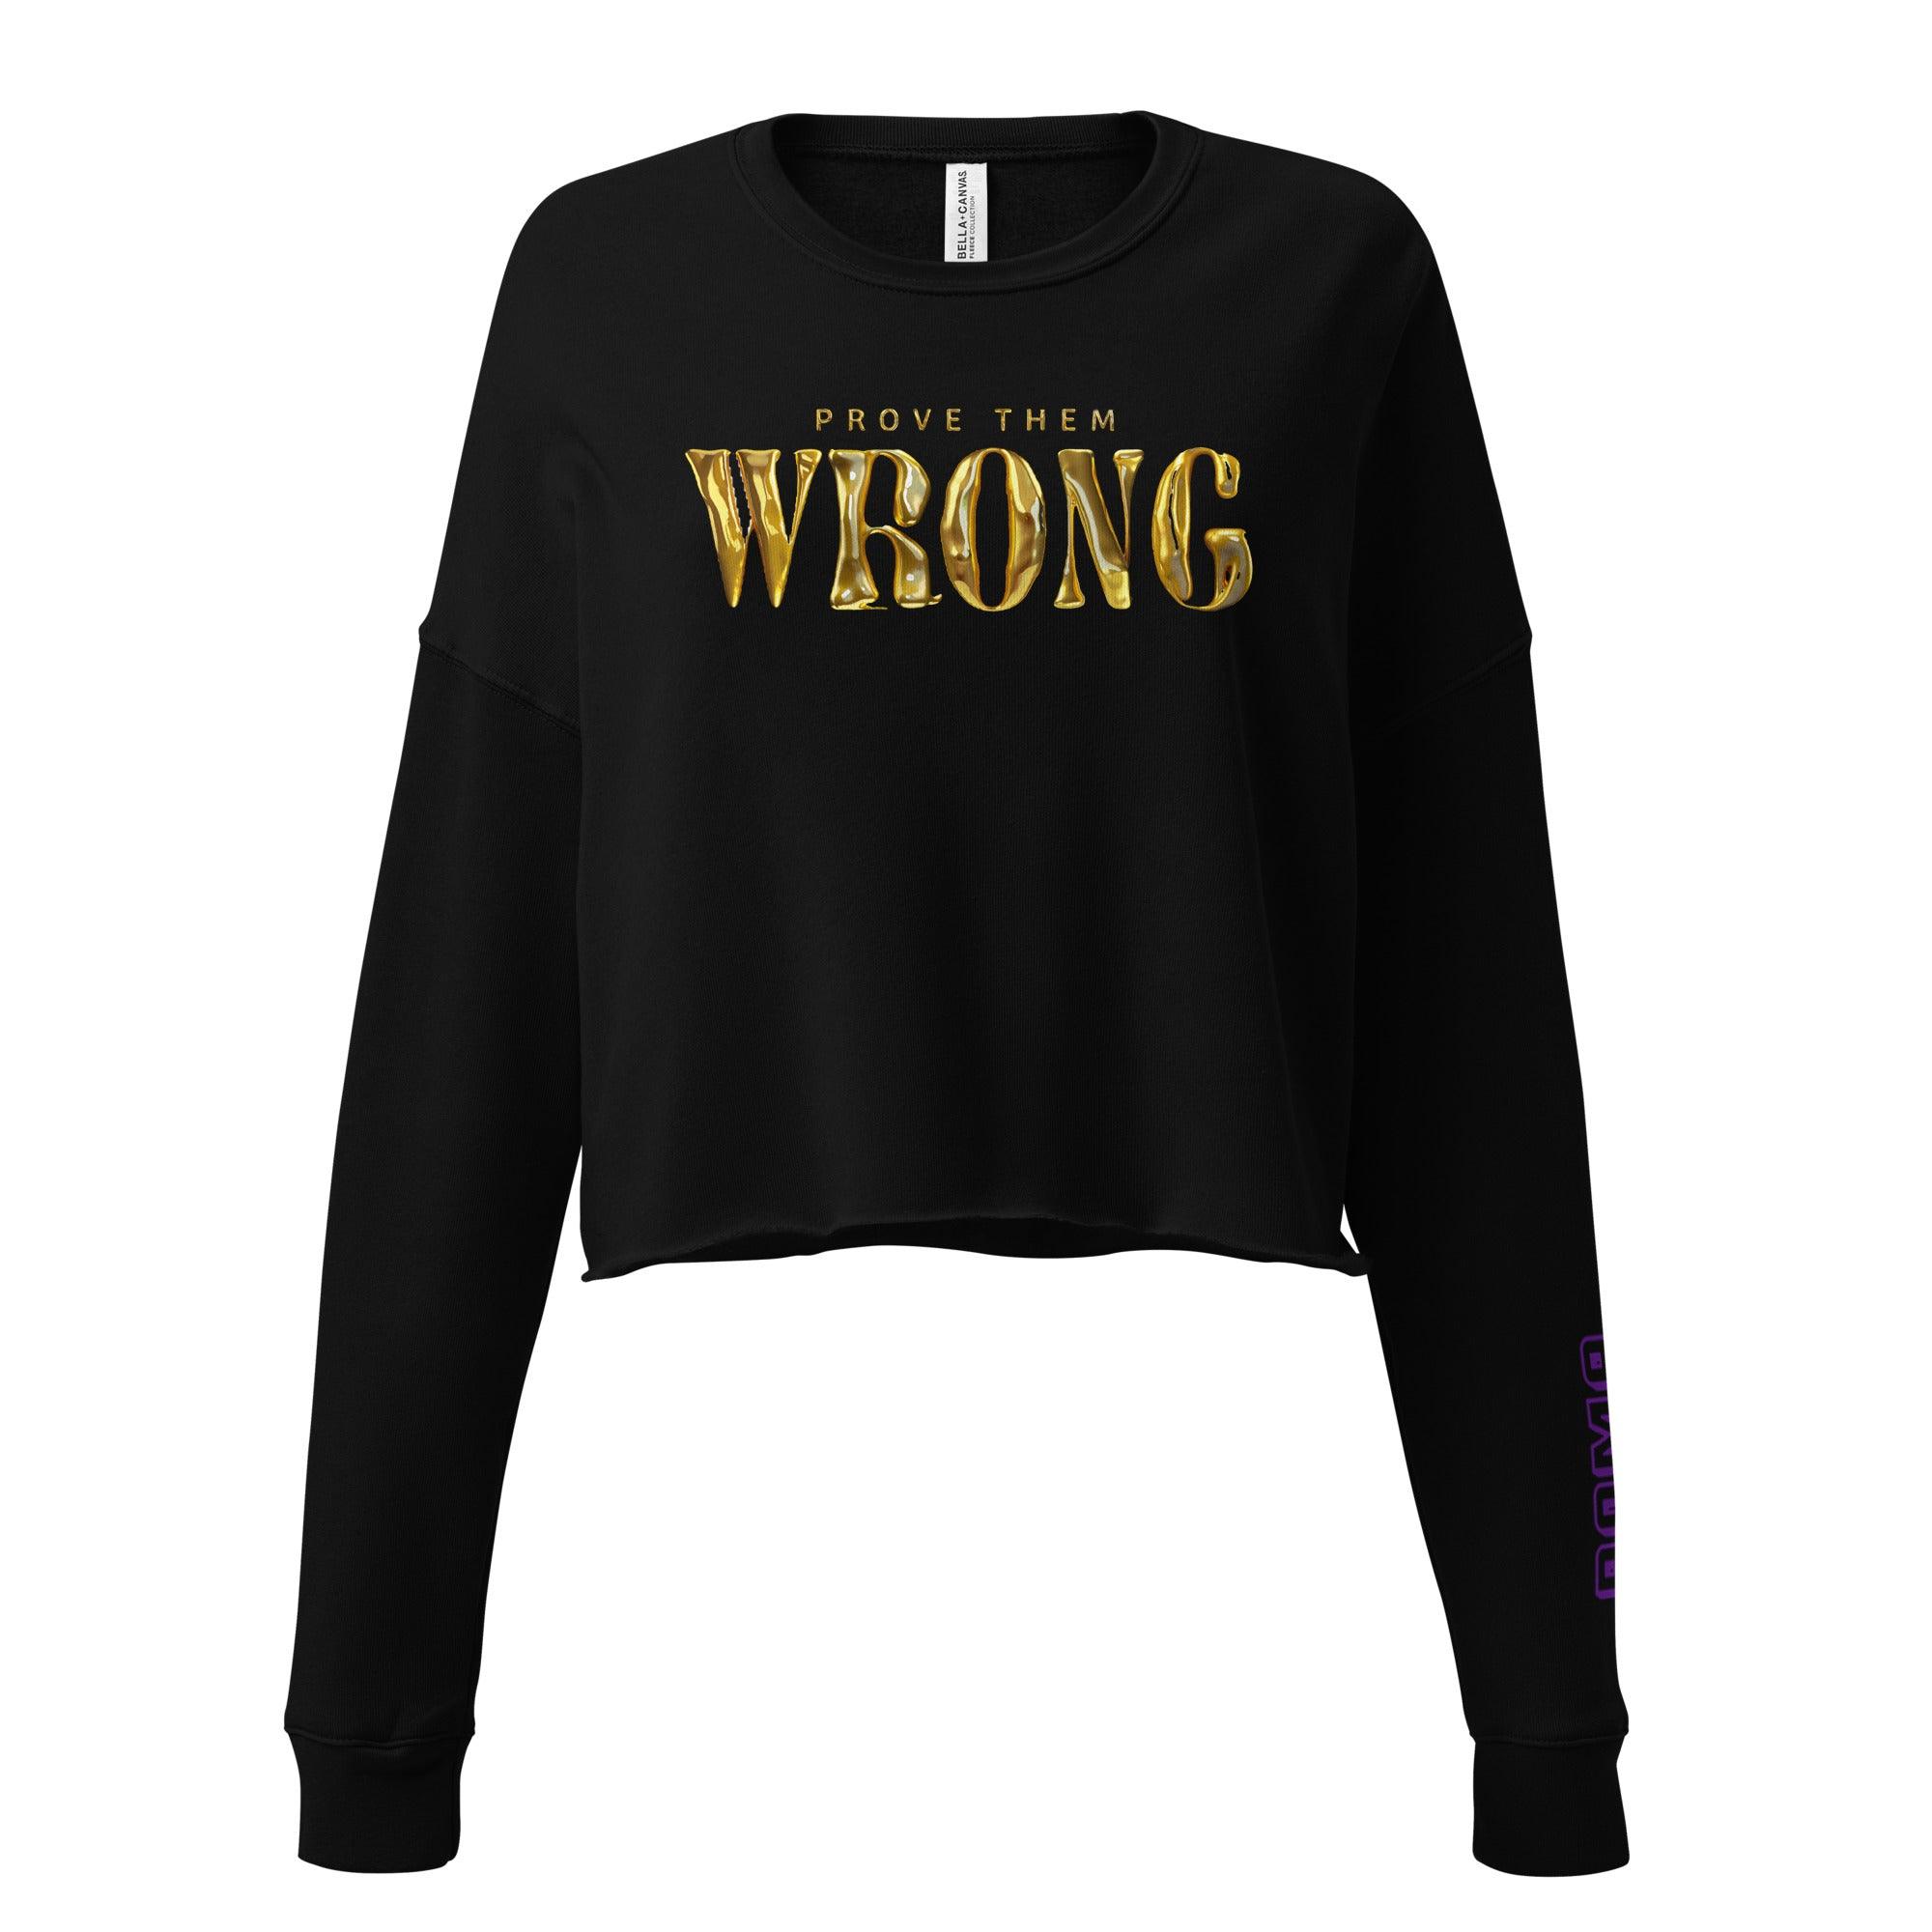 'Gold Edition Prove them wrong' Cropped Sweatshirt - POMA Graphics